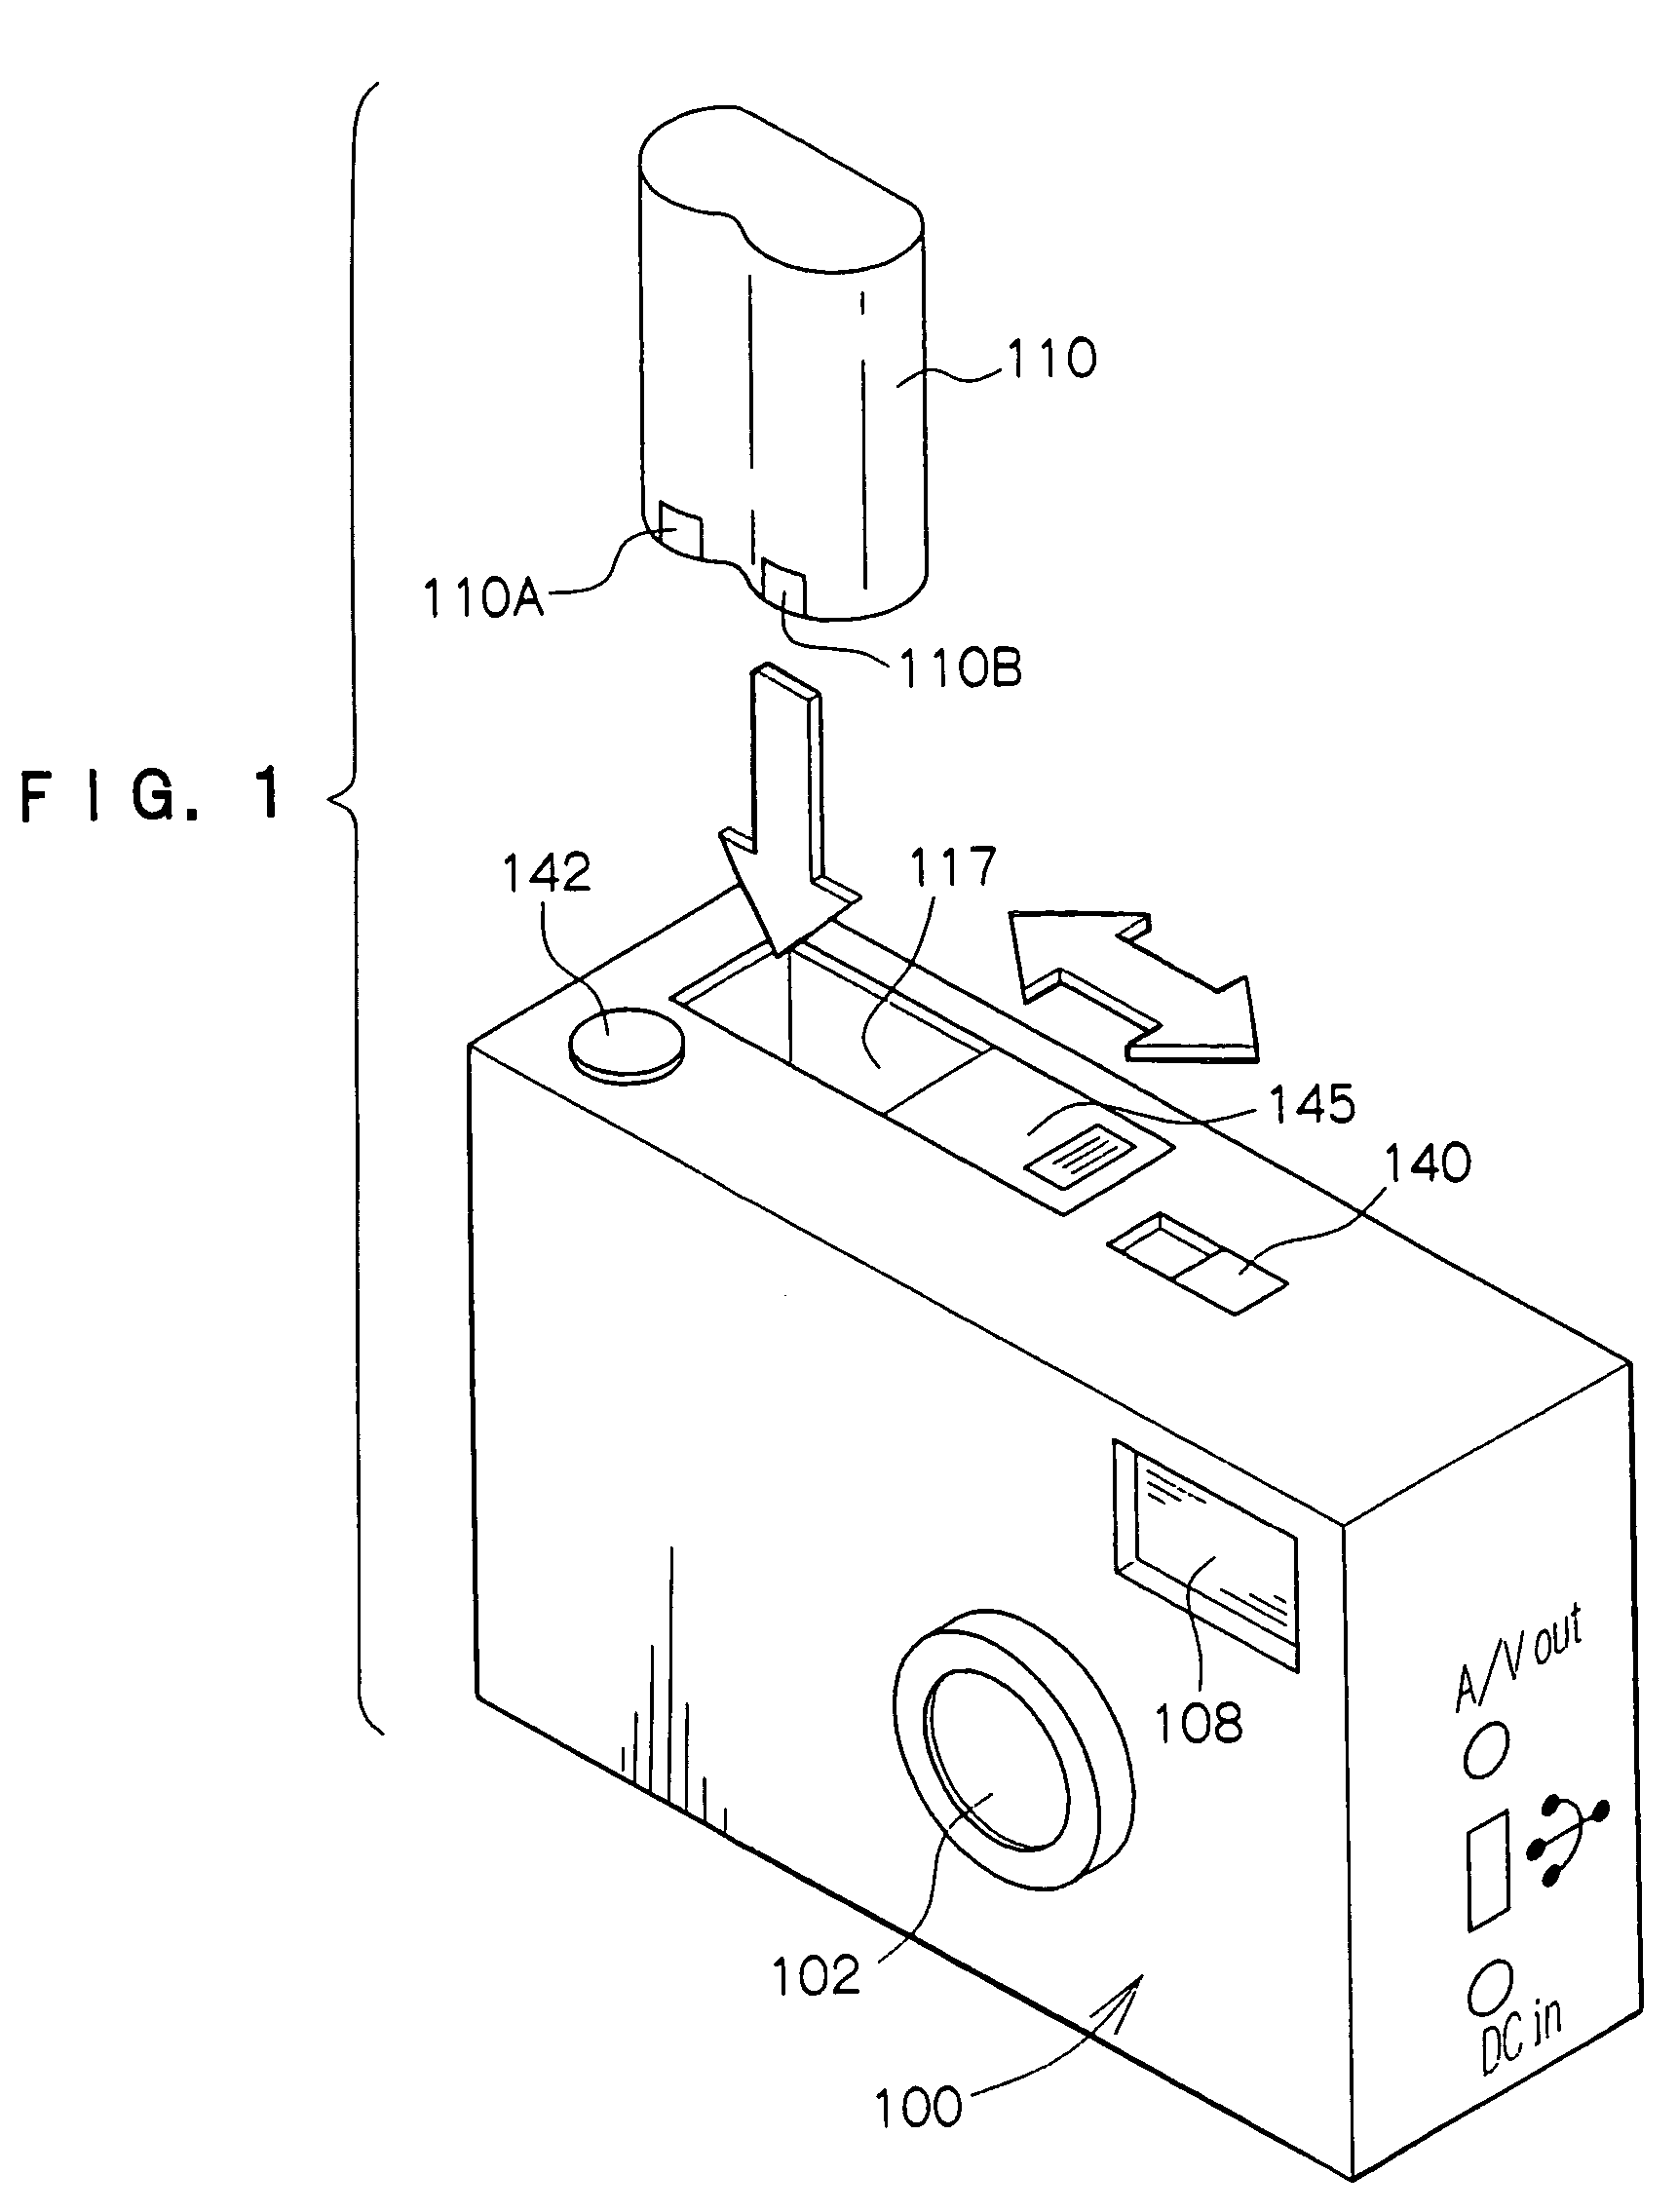 Solid-state image pickup device and optical instrument using the same for adjusting curvatures of solid-state image pickup device based on focal length of lenses in optical instrument